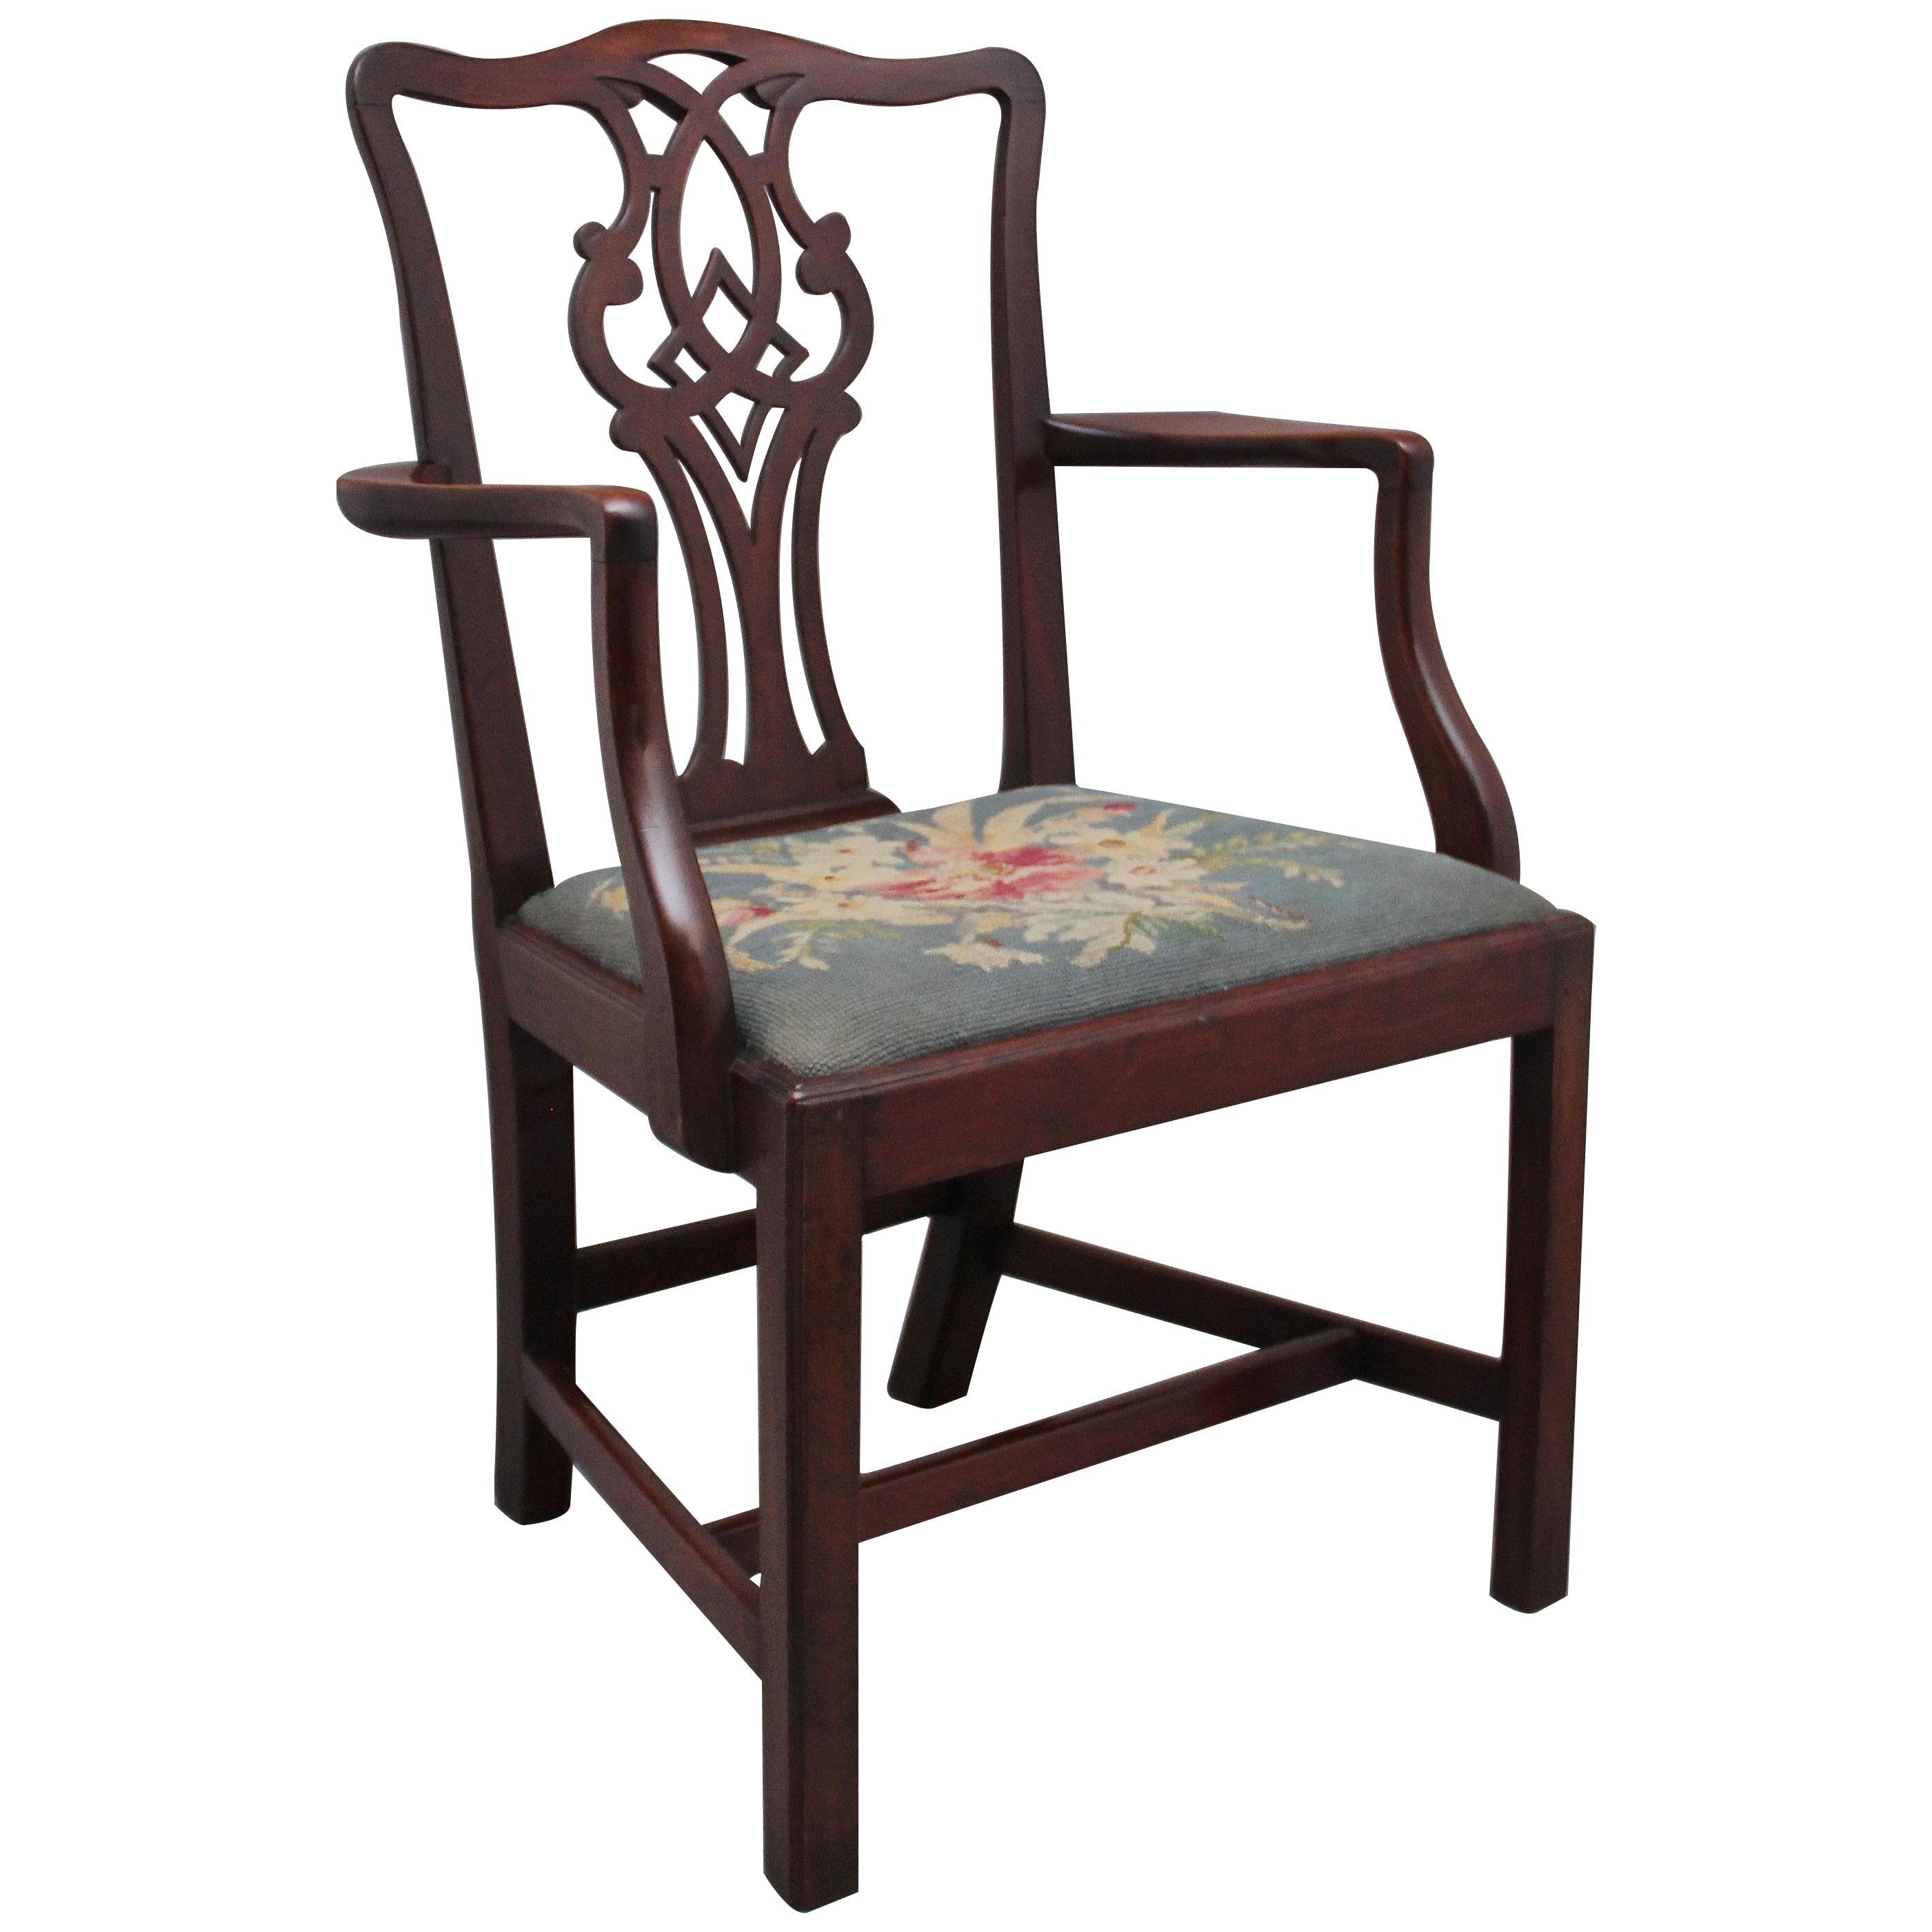 19th Century mahogany armchair in the Chippendale style